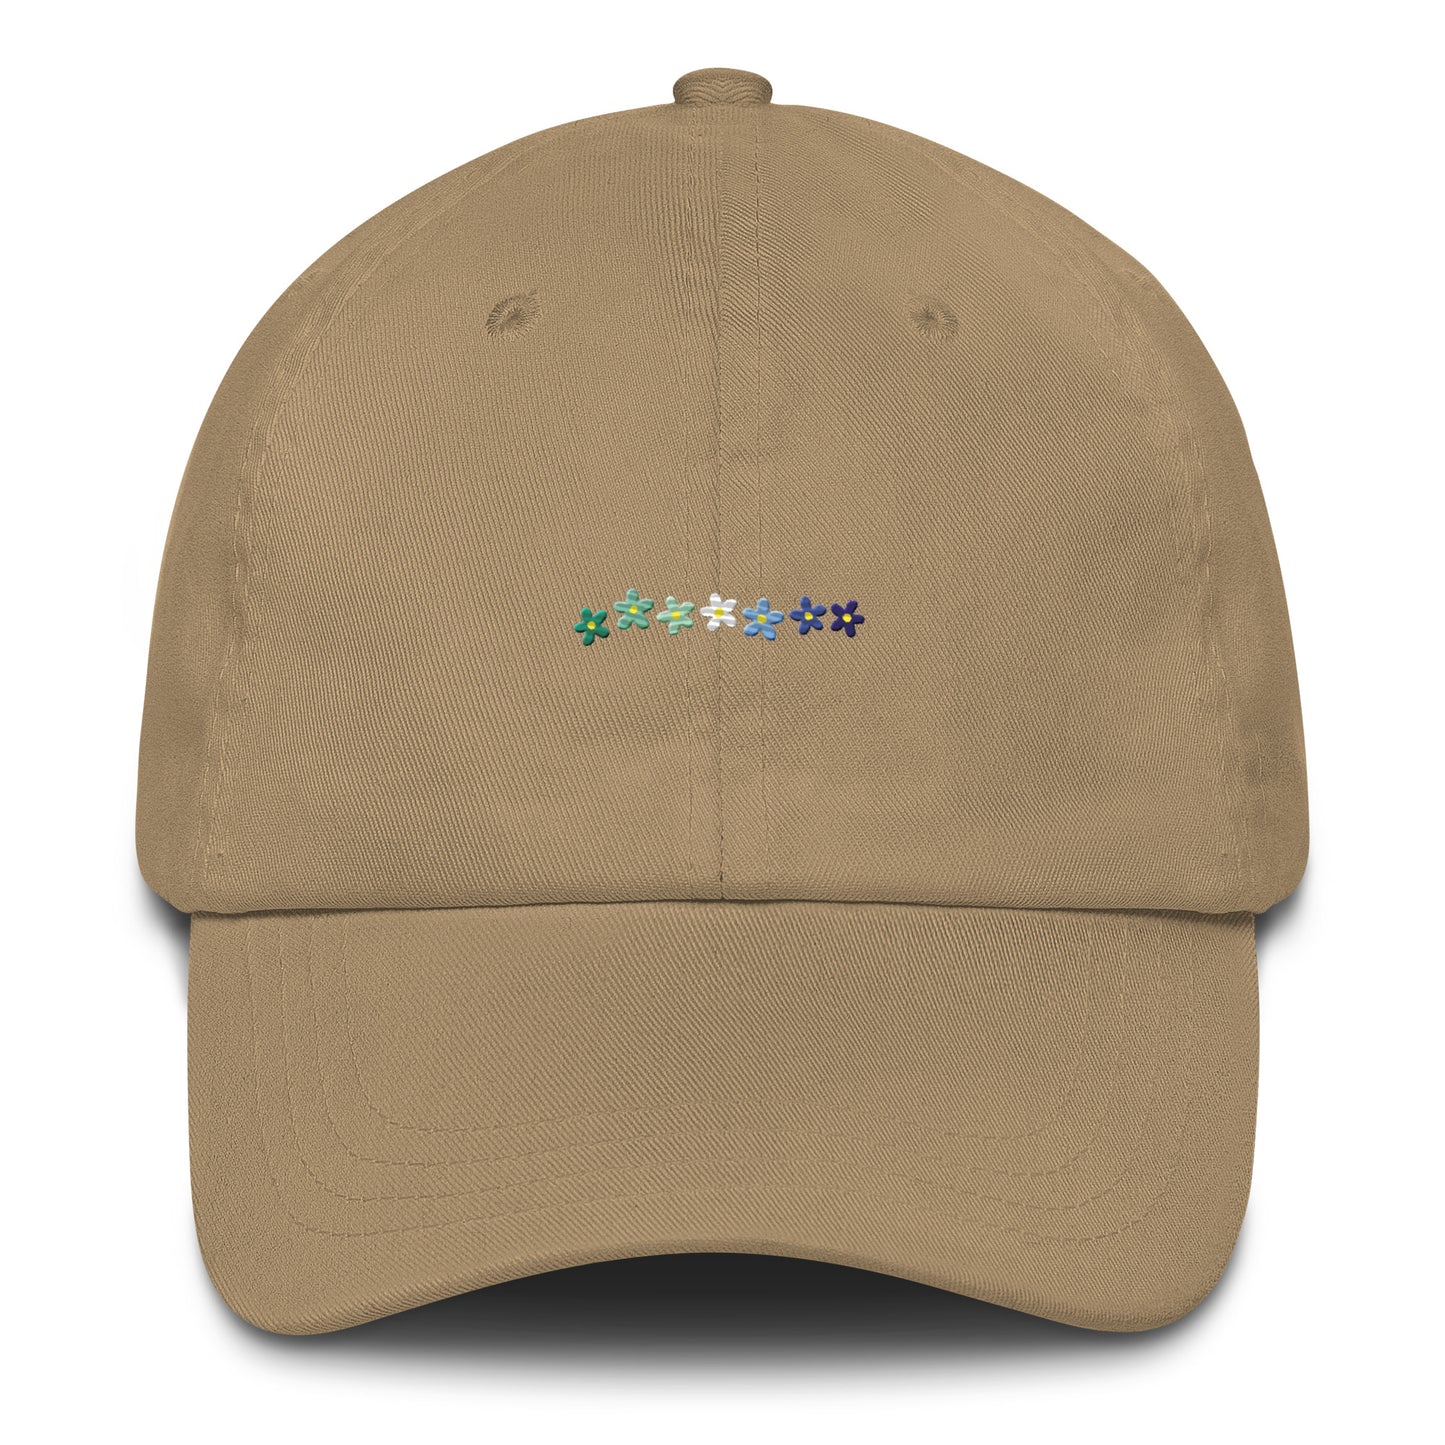 the MLM Hat